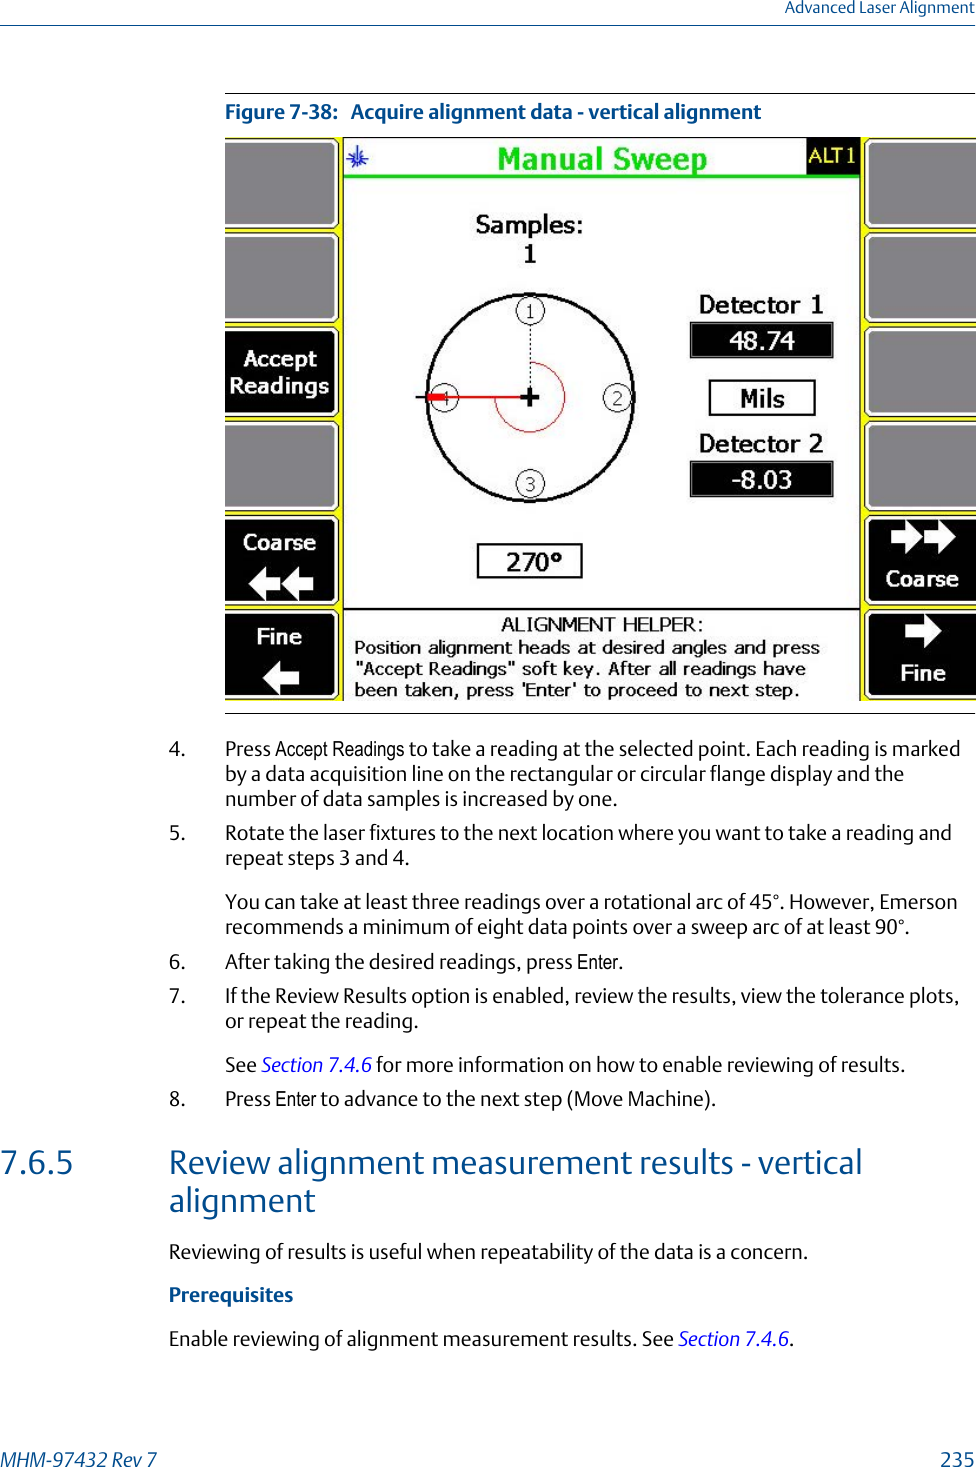 Acquire alignment data - vertical alignmentFigure 7-38:   4. Press Accept Readings to take a reading at the selected point. Each reading is markedby a data acquisition line on the rectangular or circular flange display and thenumber of data samples is increased by one.5. Rotate the laser fixtures to the next location where you want to take a reading andrepeat steps 3 and 4.You can take at least three readings over a rotational arc of 45°. However, Emersonrecommends a minimum of eight data points over a sweep arc of at least 90°.6. After taking the desired readings, press Enter.7. If the Review Results option is enabled, review the results, view the tolerance plots,or repeat the reading.See Section 7.4.6 for more information on how to enable reviewing of results.8. Press Enter to advance to the next step (Move Machine).7.6.5 Review alignment measurement results - verticalalignmentReviewing of results is useful when repeatability of the data is a concern.PrerequisitesEnable reviewing of alignment measurement results. See Section 7.4.6.Advanced Laser AlignmentMHM-97432 Rev 7  235